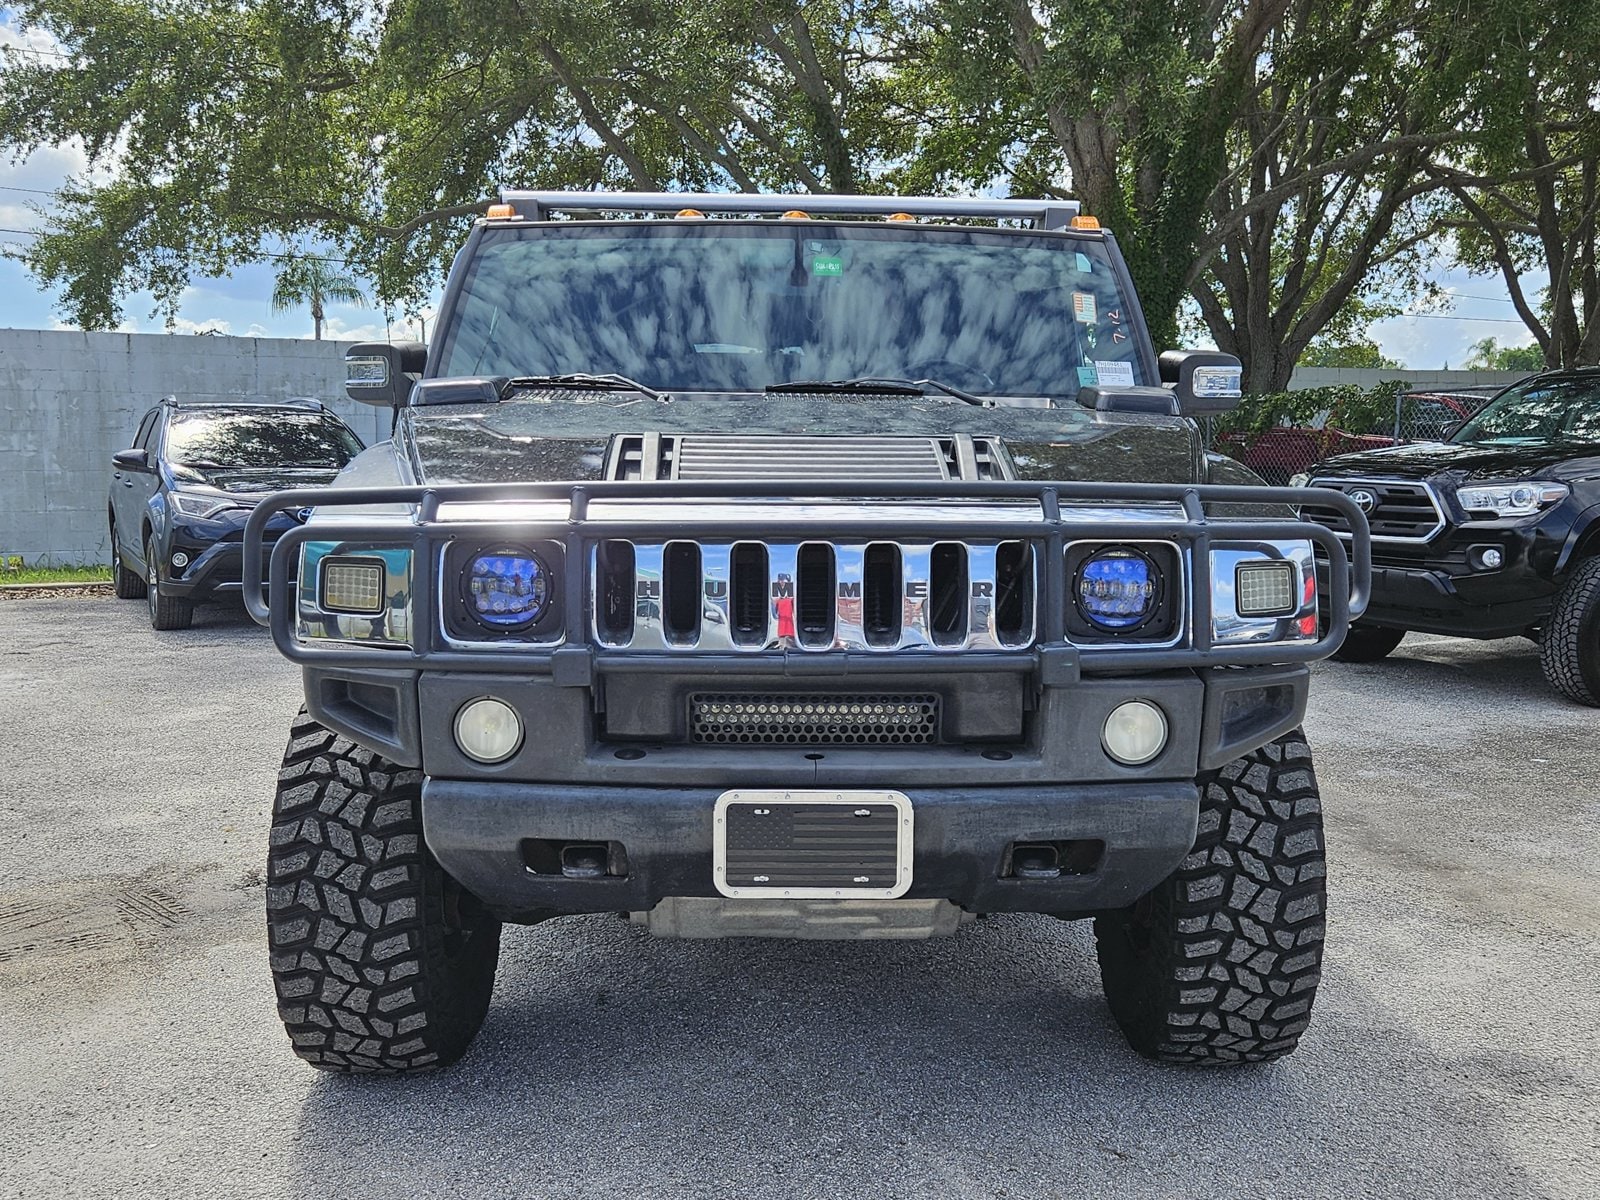 Used 2007 Hummer H2 SUV with VIN 5GRGN23U97H109481 for sale in Pinellas Park, FL